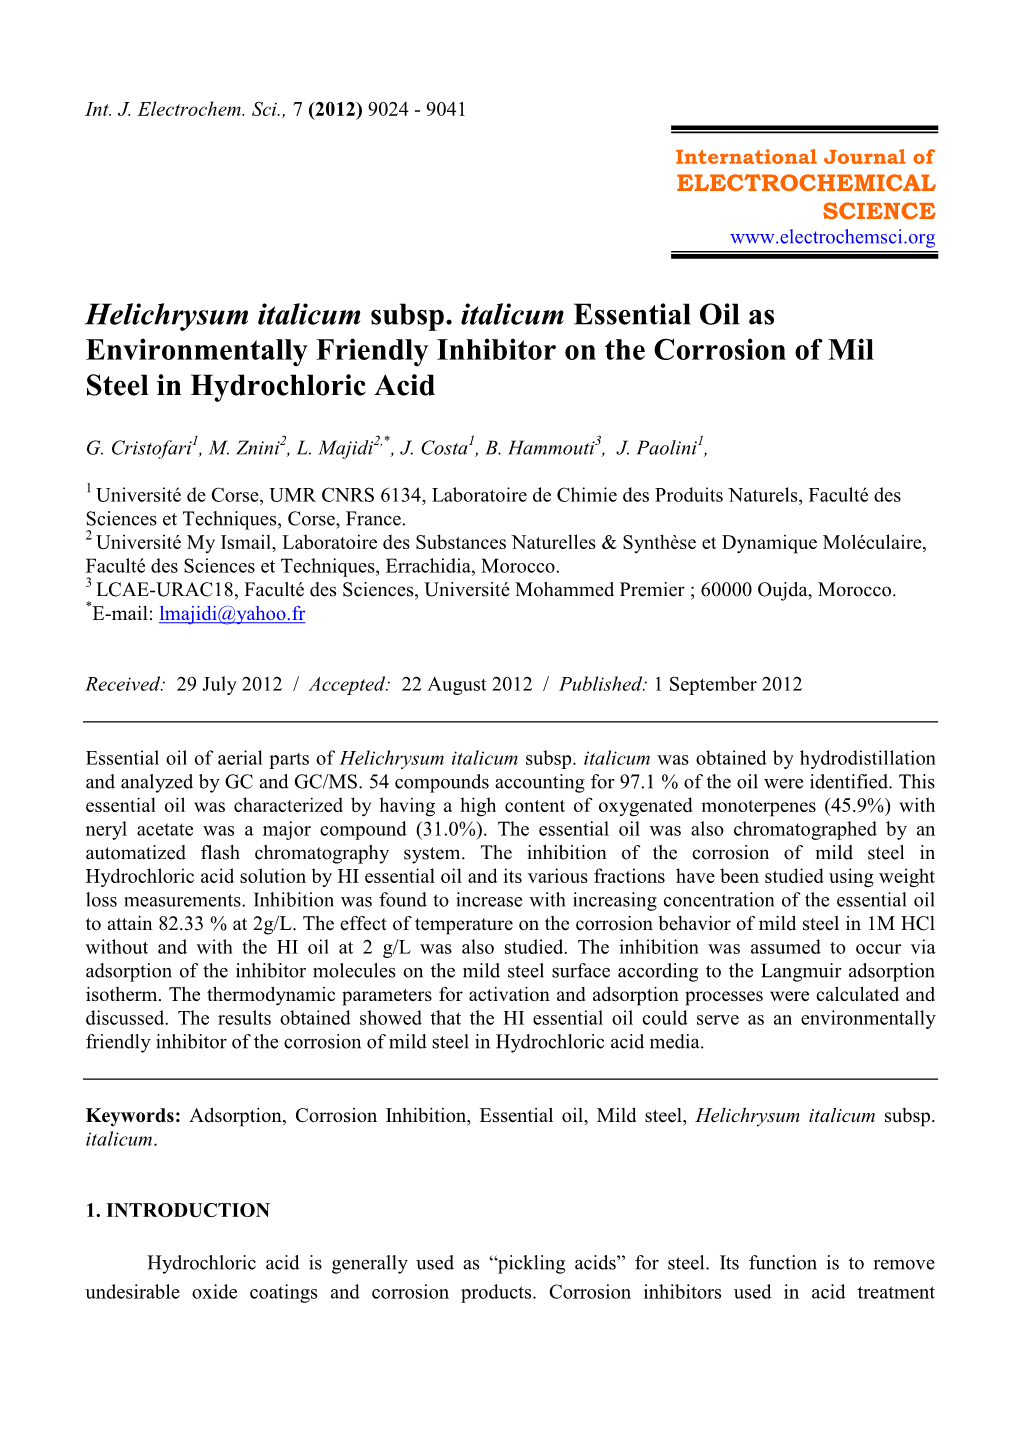 Helichrysum Italicum Subsp. Italicum Essential Oil As Environmentally Friendly Inhibitor on the Corrosion of Mil Steel in Hydrochloric Acid